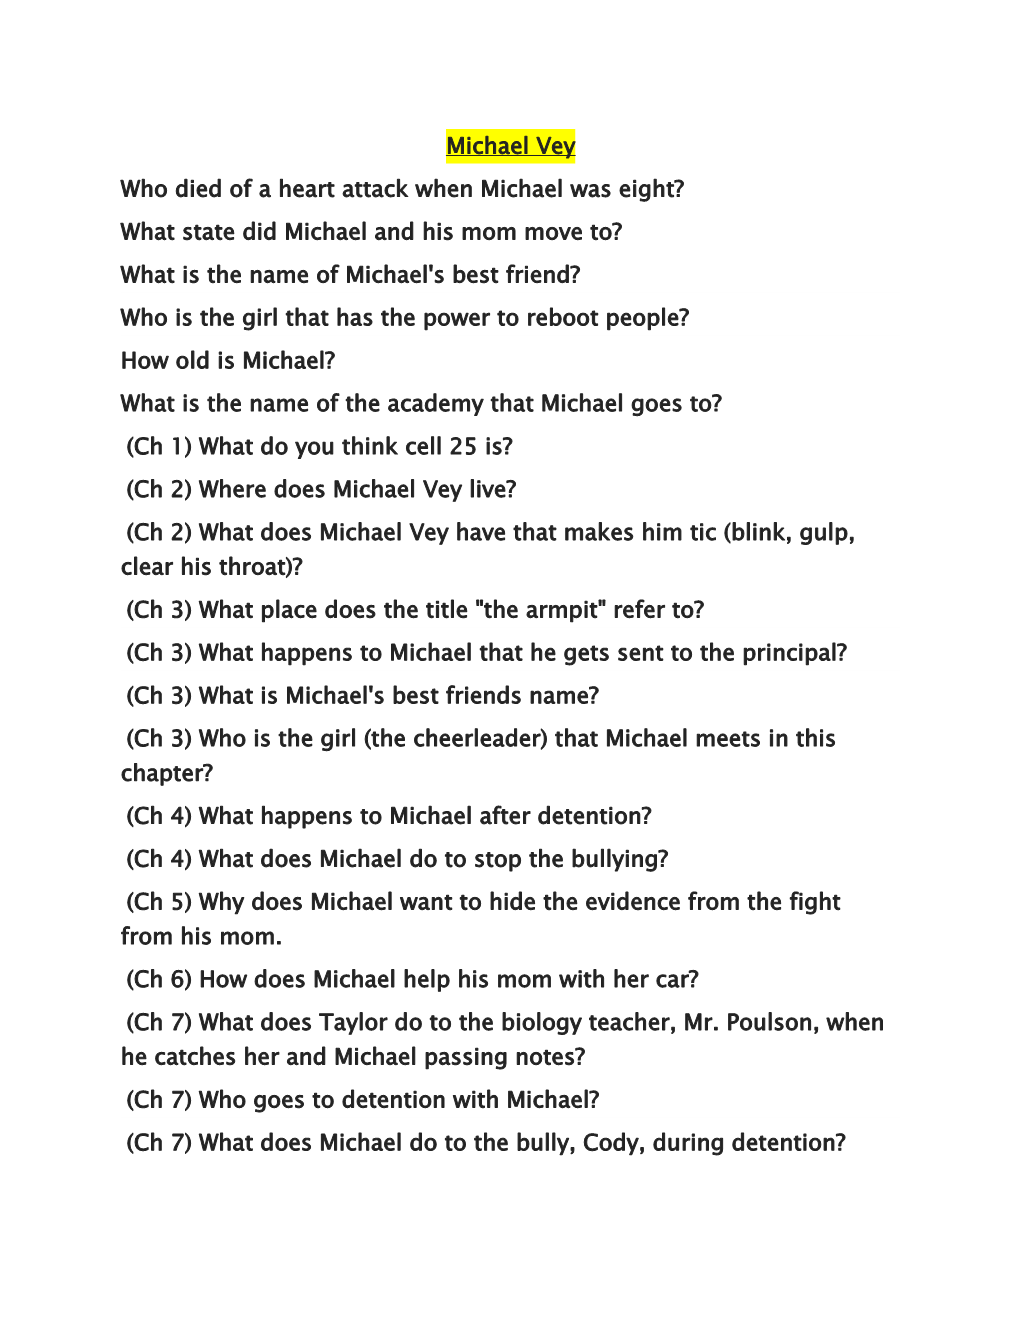 Who Died of a Heart Attack When Michael Was Eight?